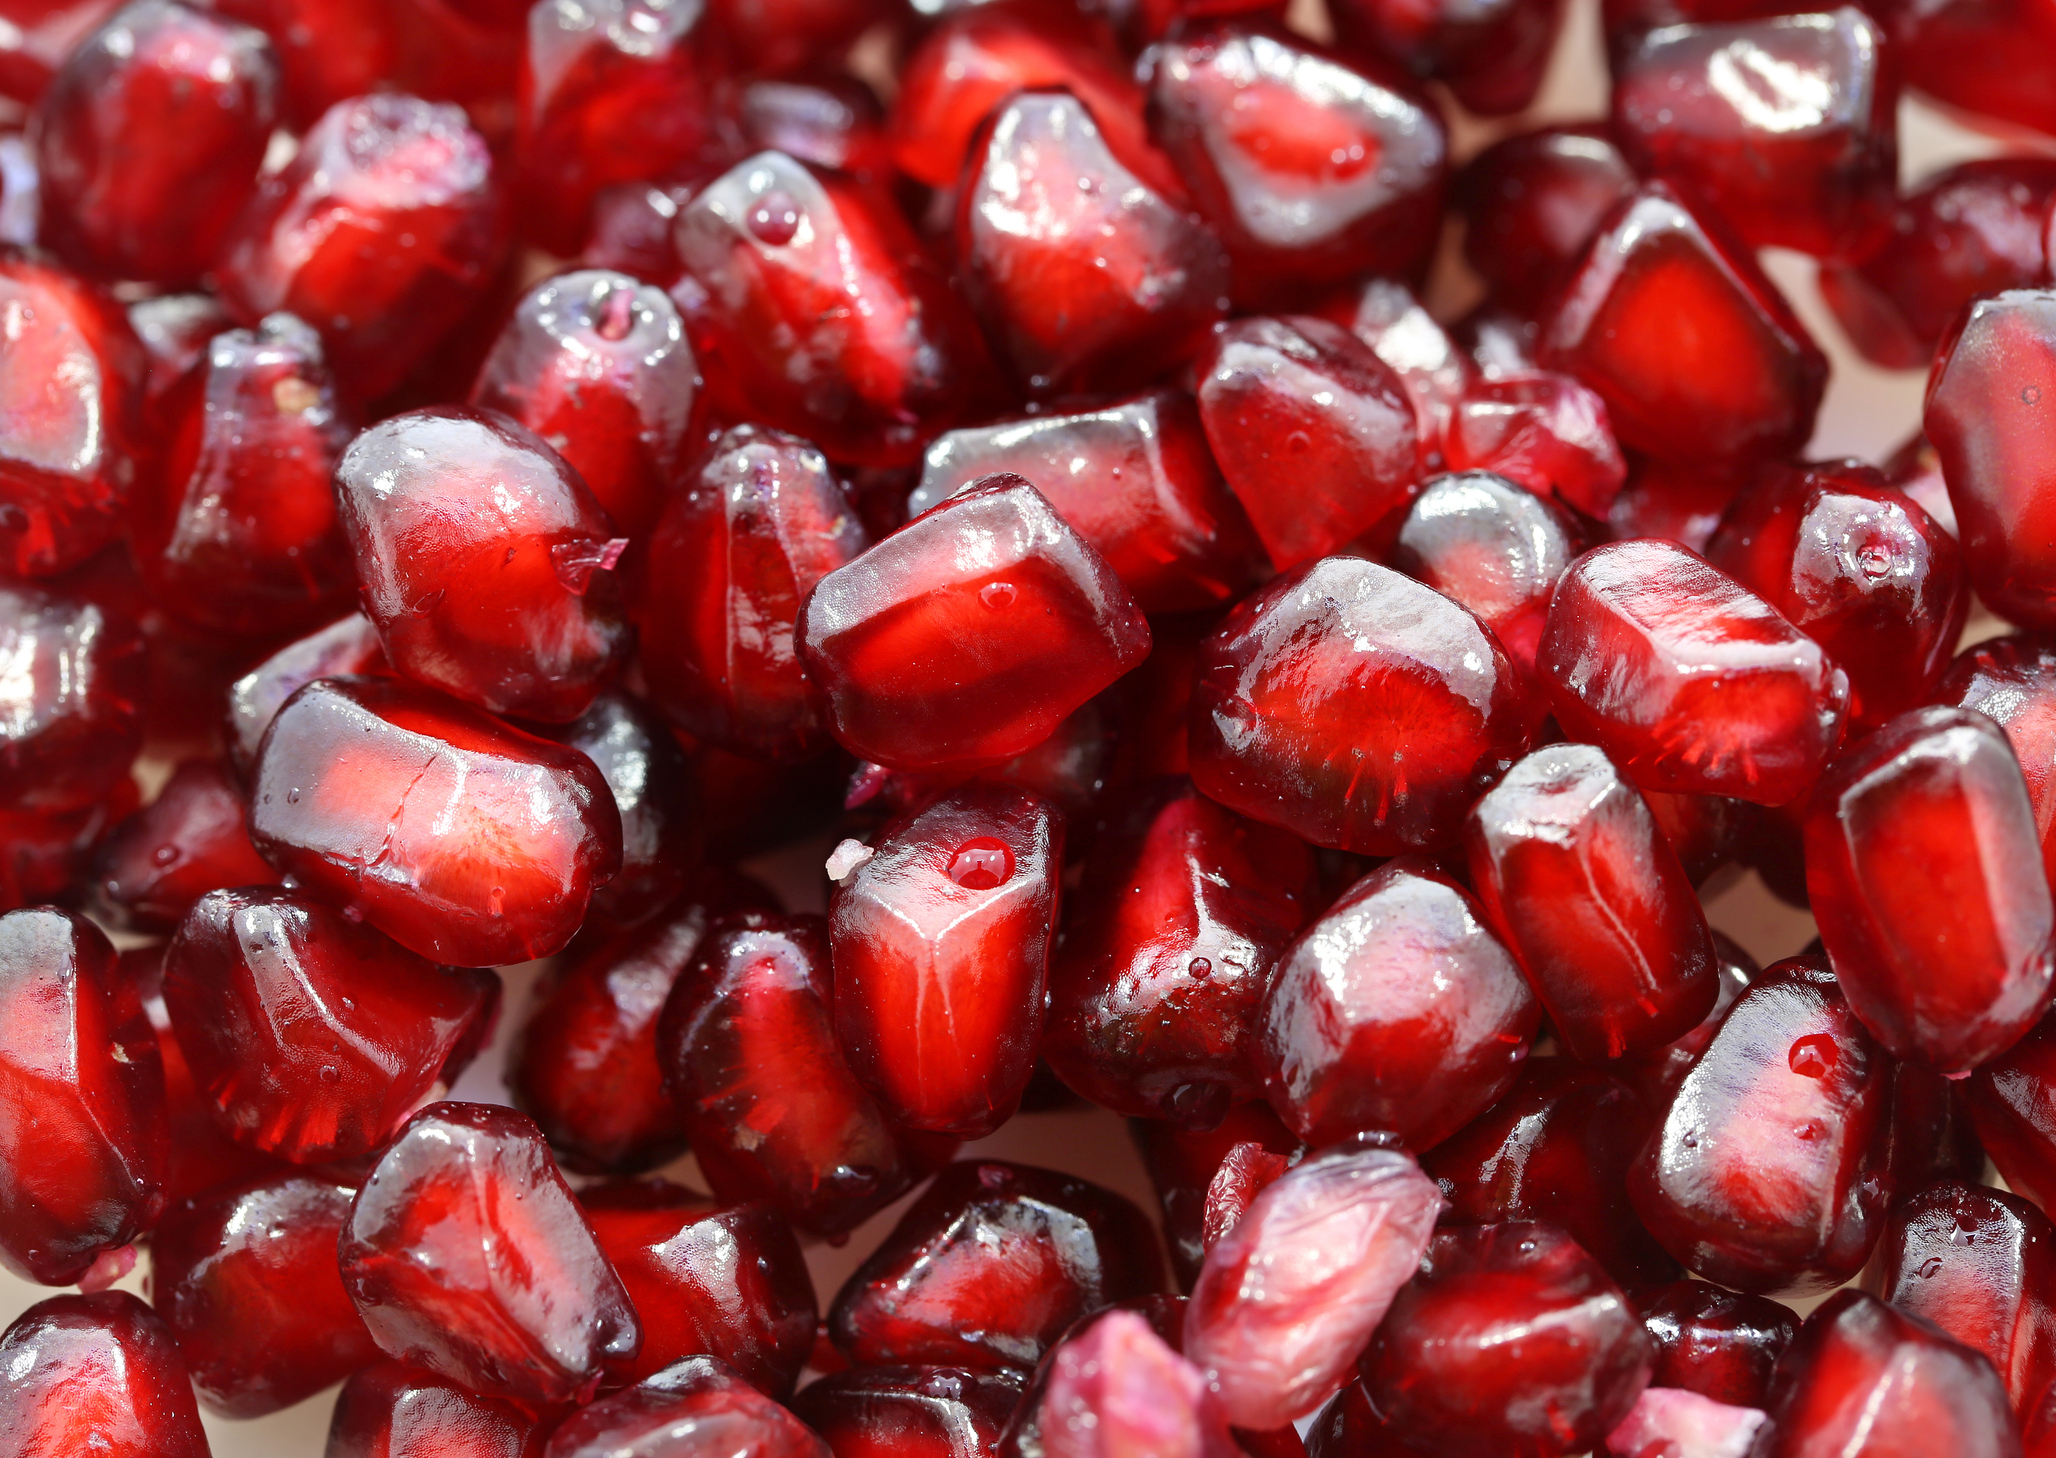 How pomegranate can flush Alzheimer’s out of your brain